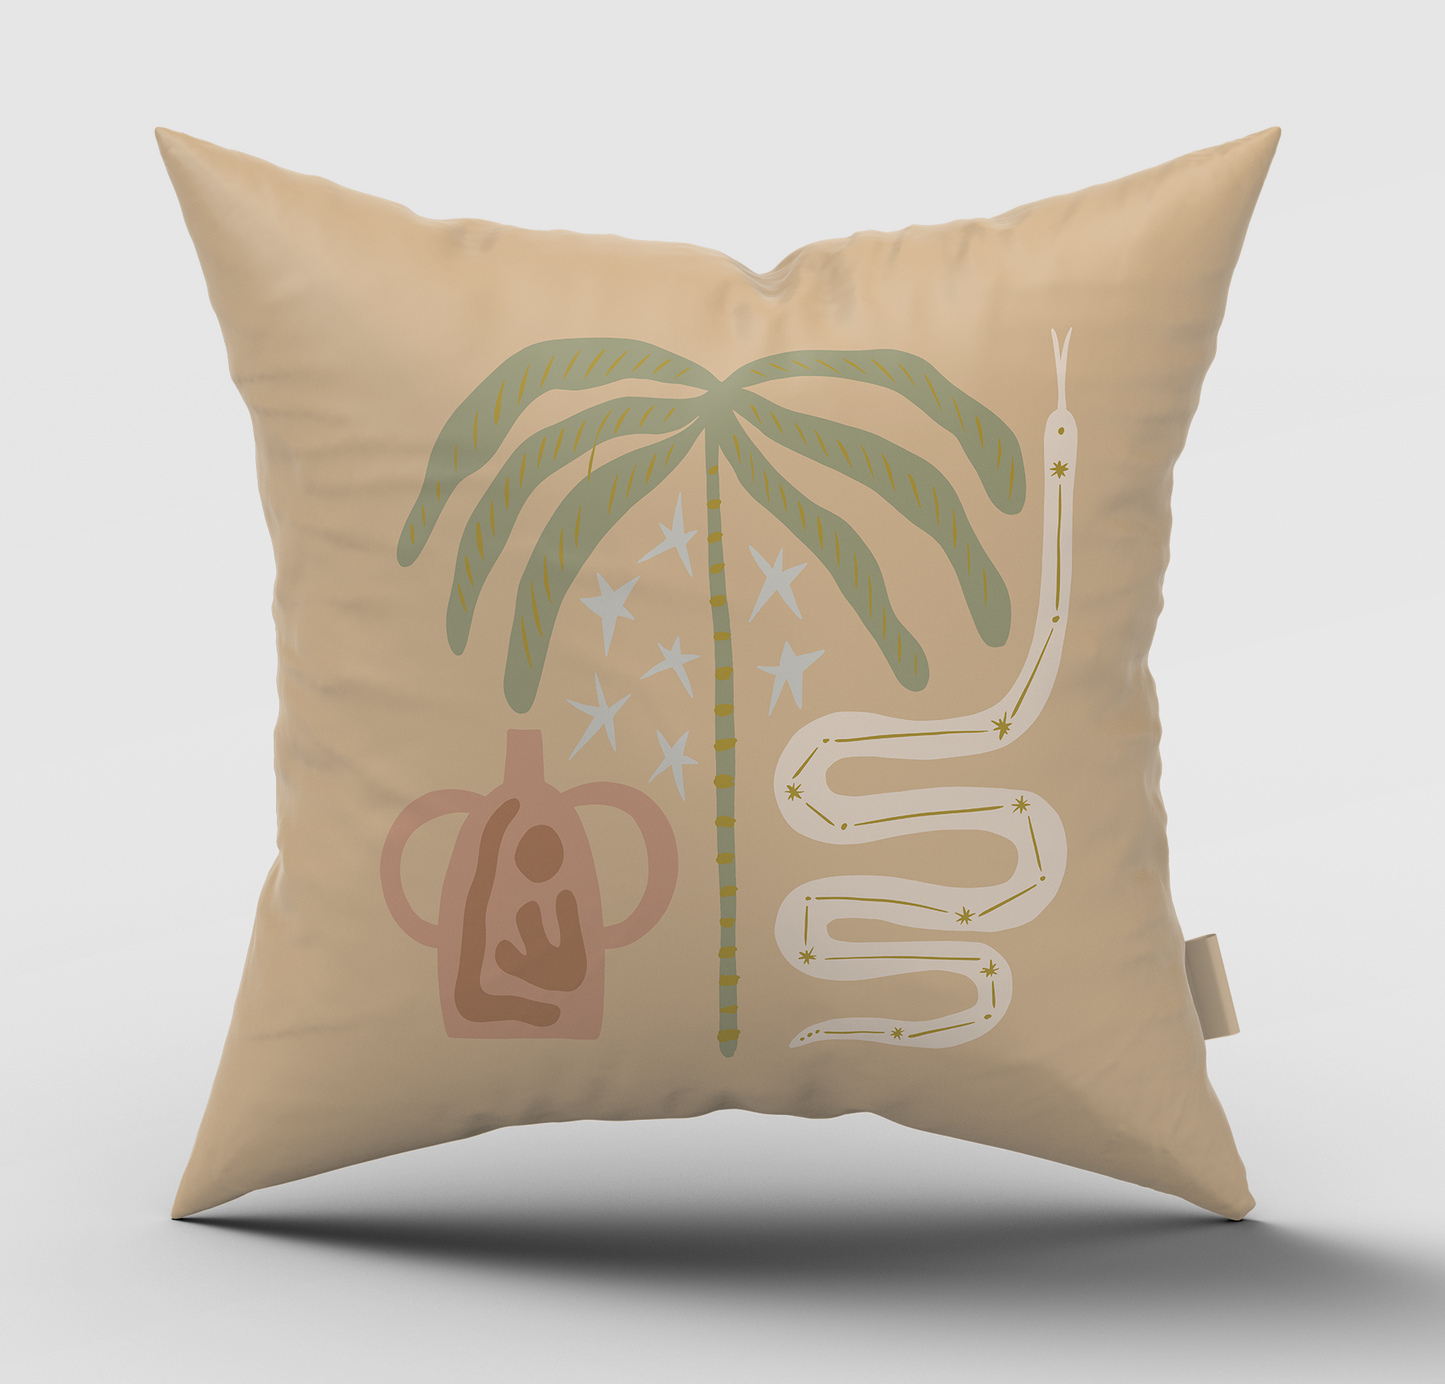 The Serpent Natural Cushion Cover